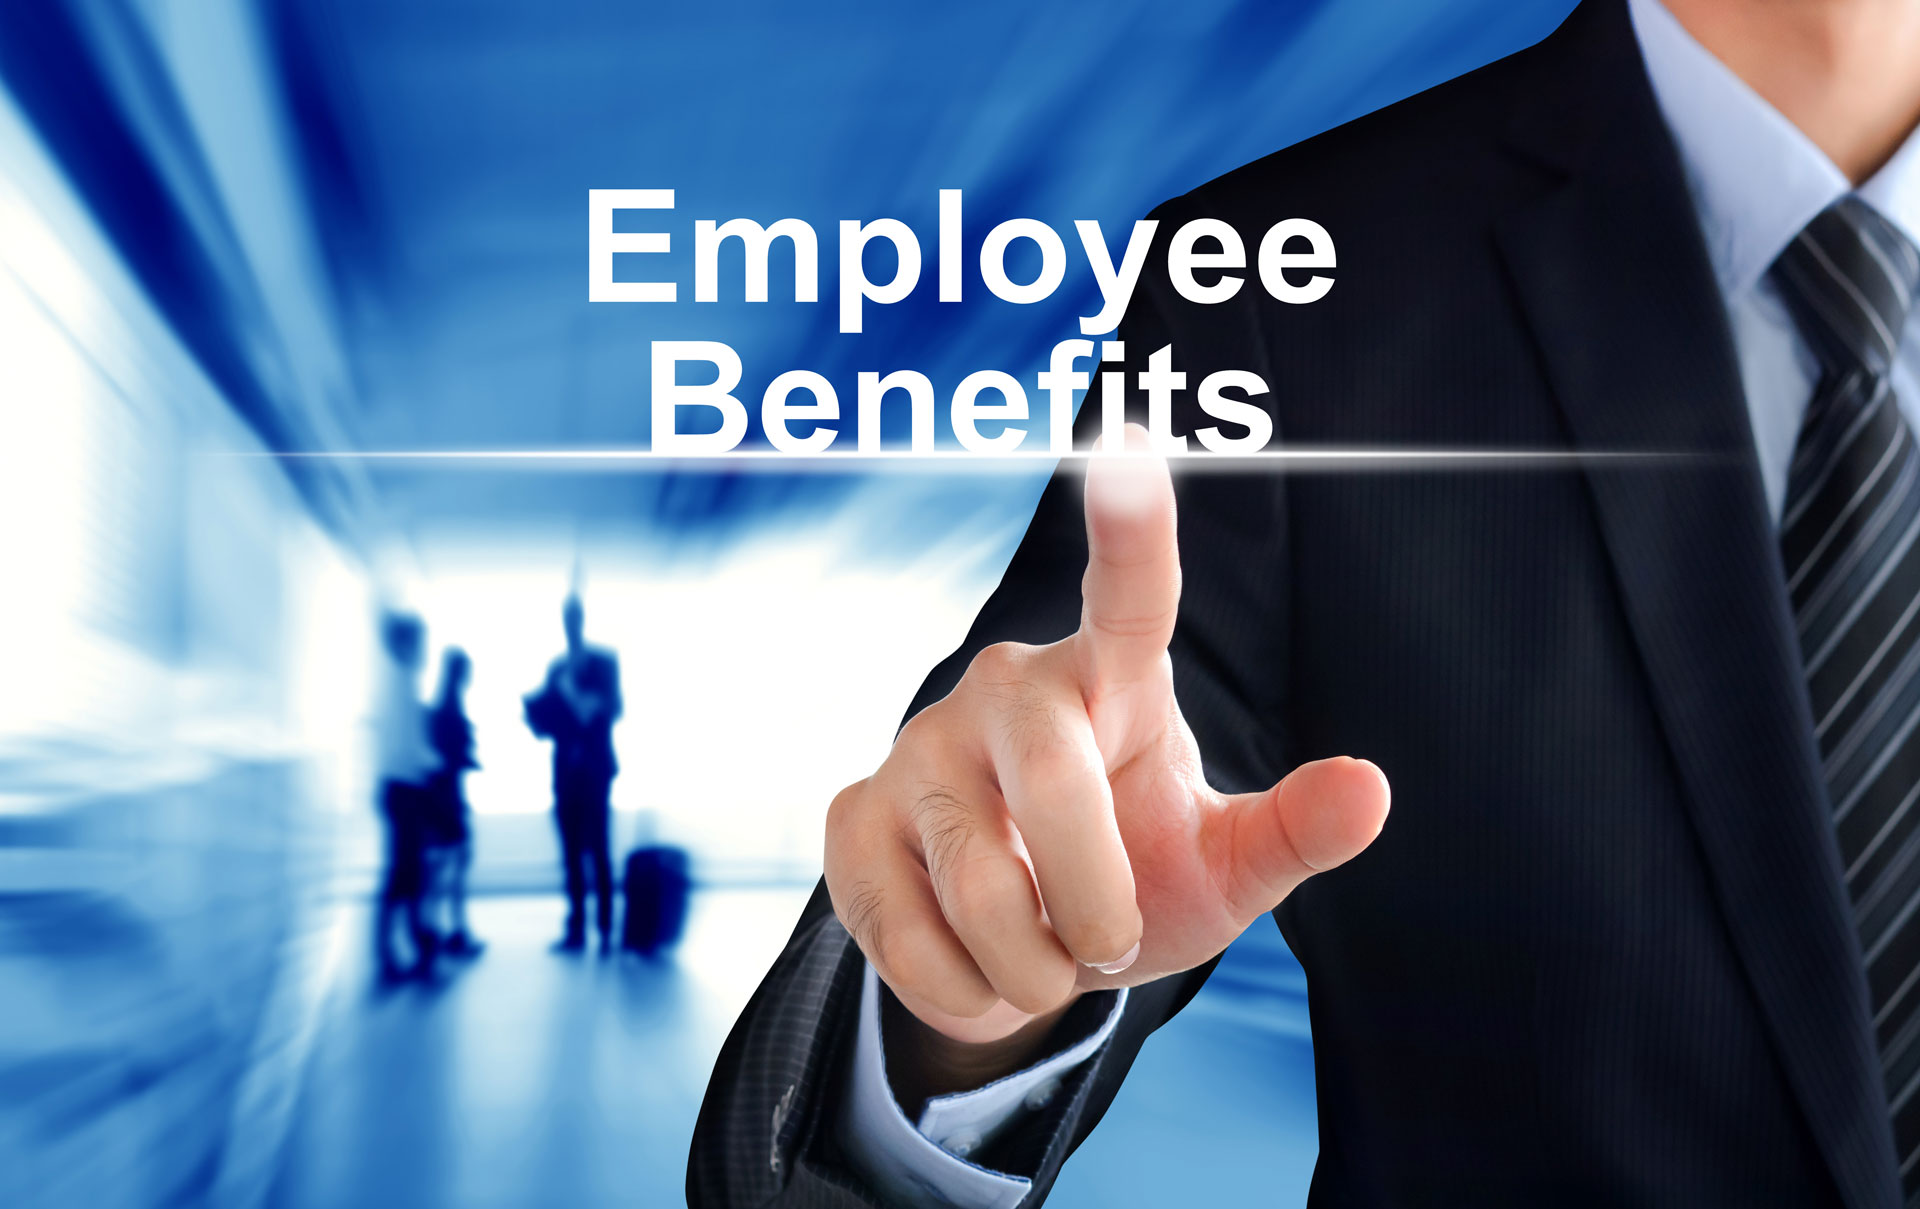 The Benefits Balance – what really matters to employees?